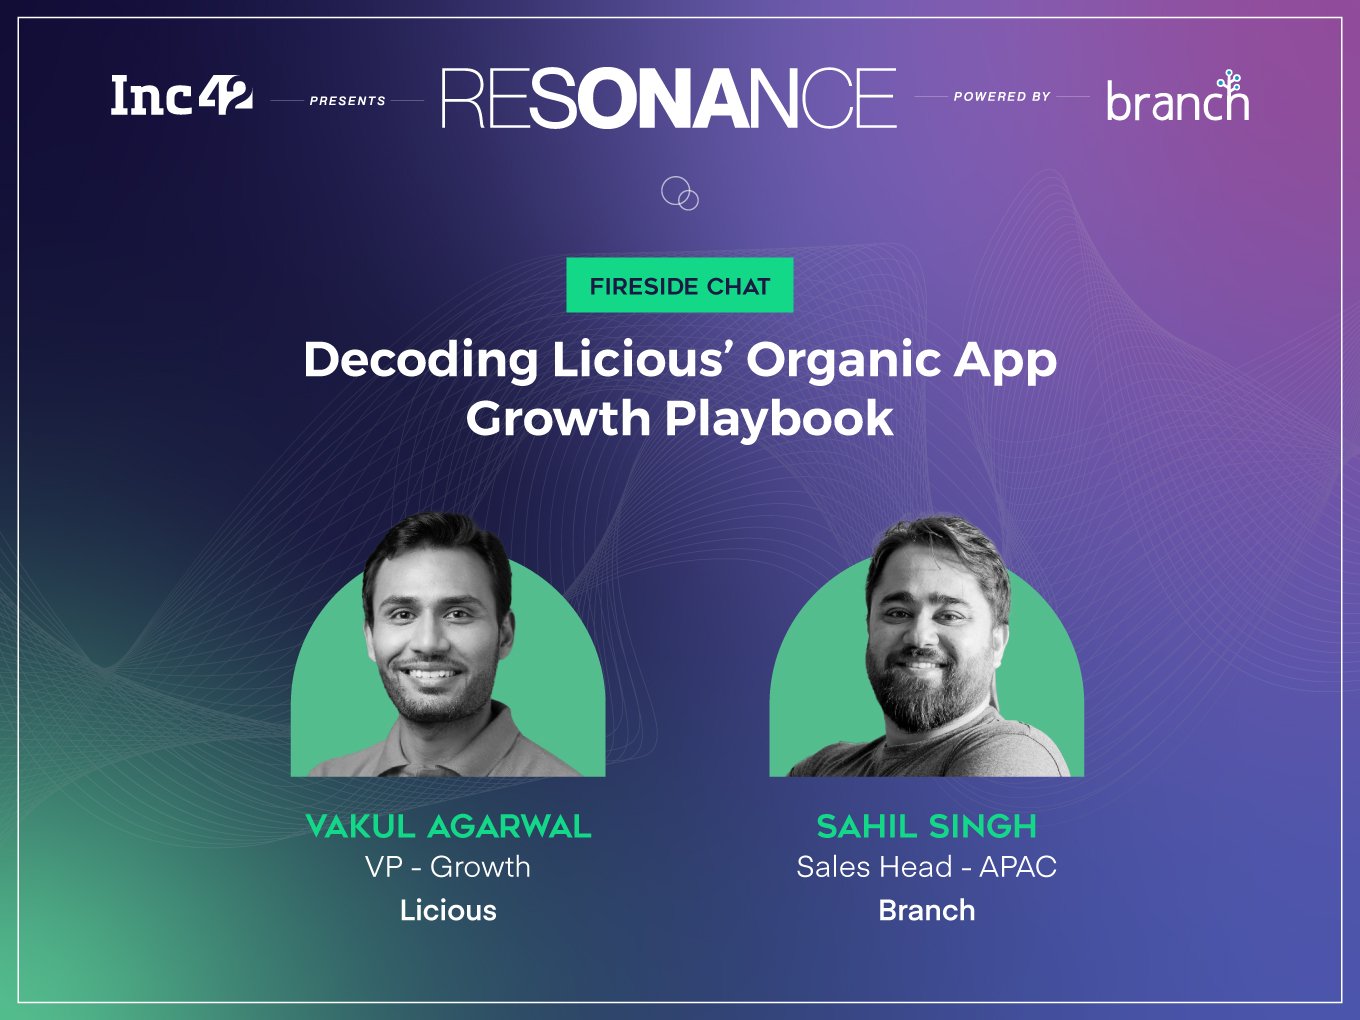 HL in Video: Decoding Licious’ Organic App Growth Playbook